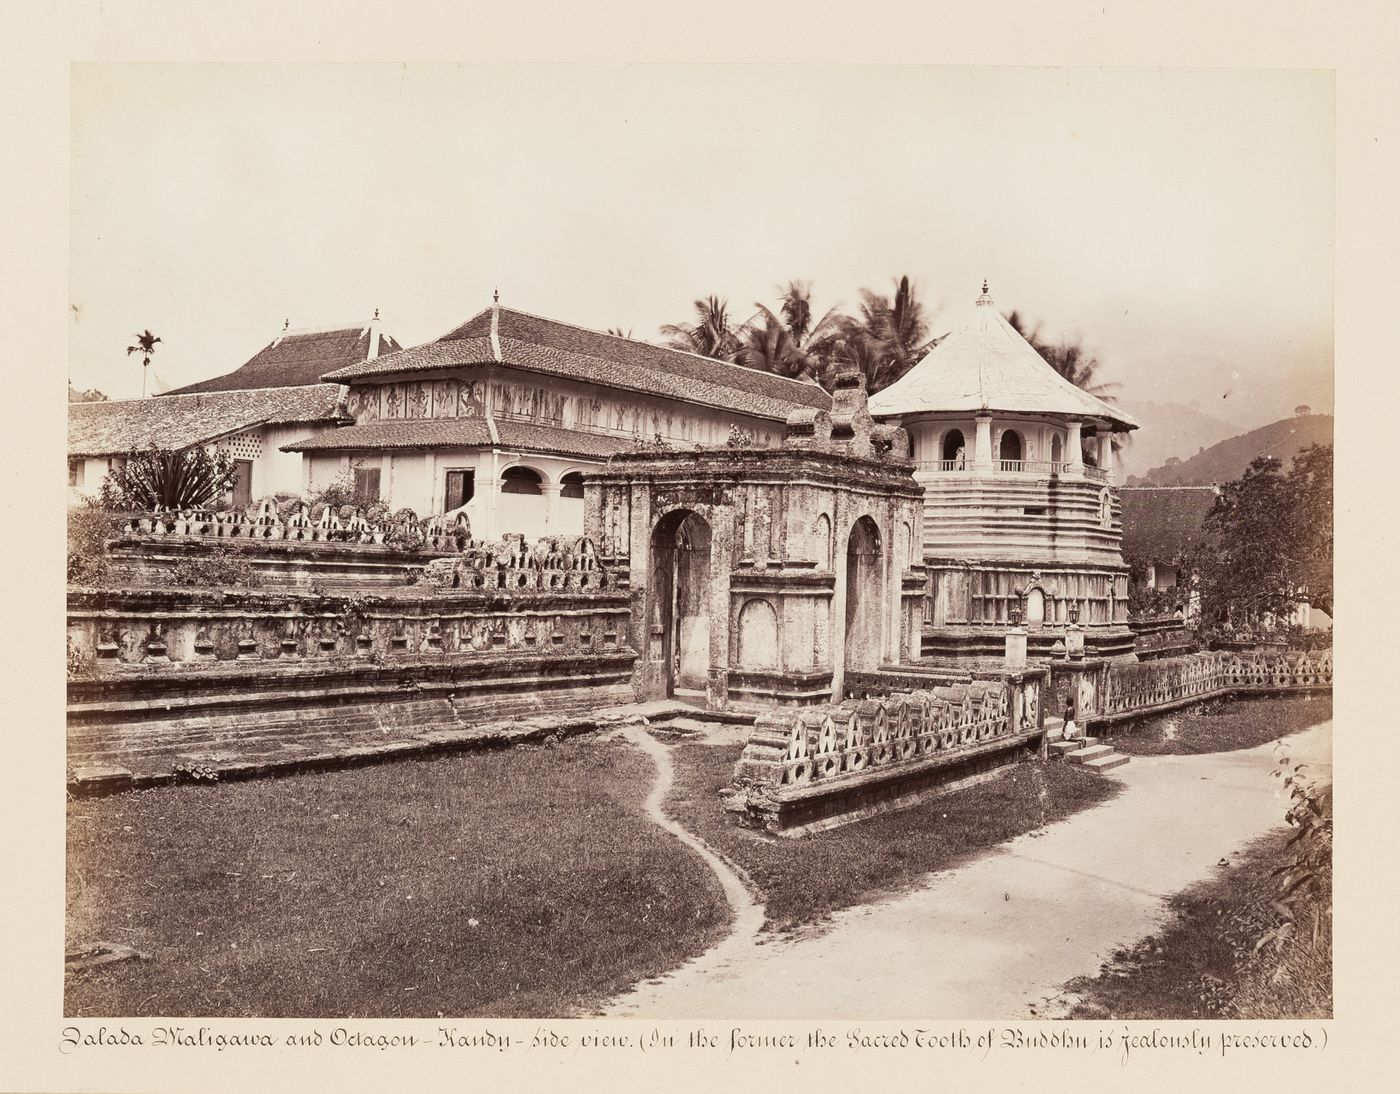 View of the entrance gateway and walls of the Temple of the Tooth (also known as the Sri Dalada Maligawa) with temple buildings in the background, Kandy, Ceylon (now Sri Lanka)